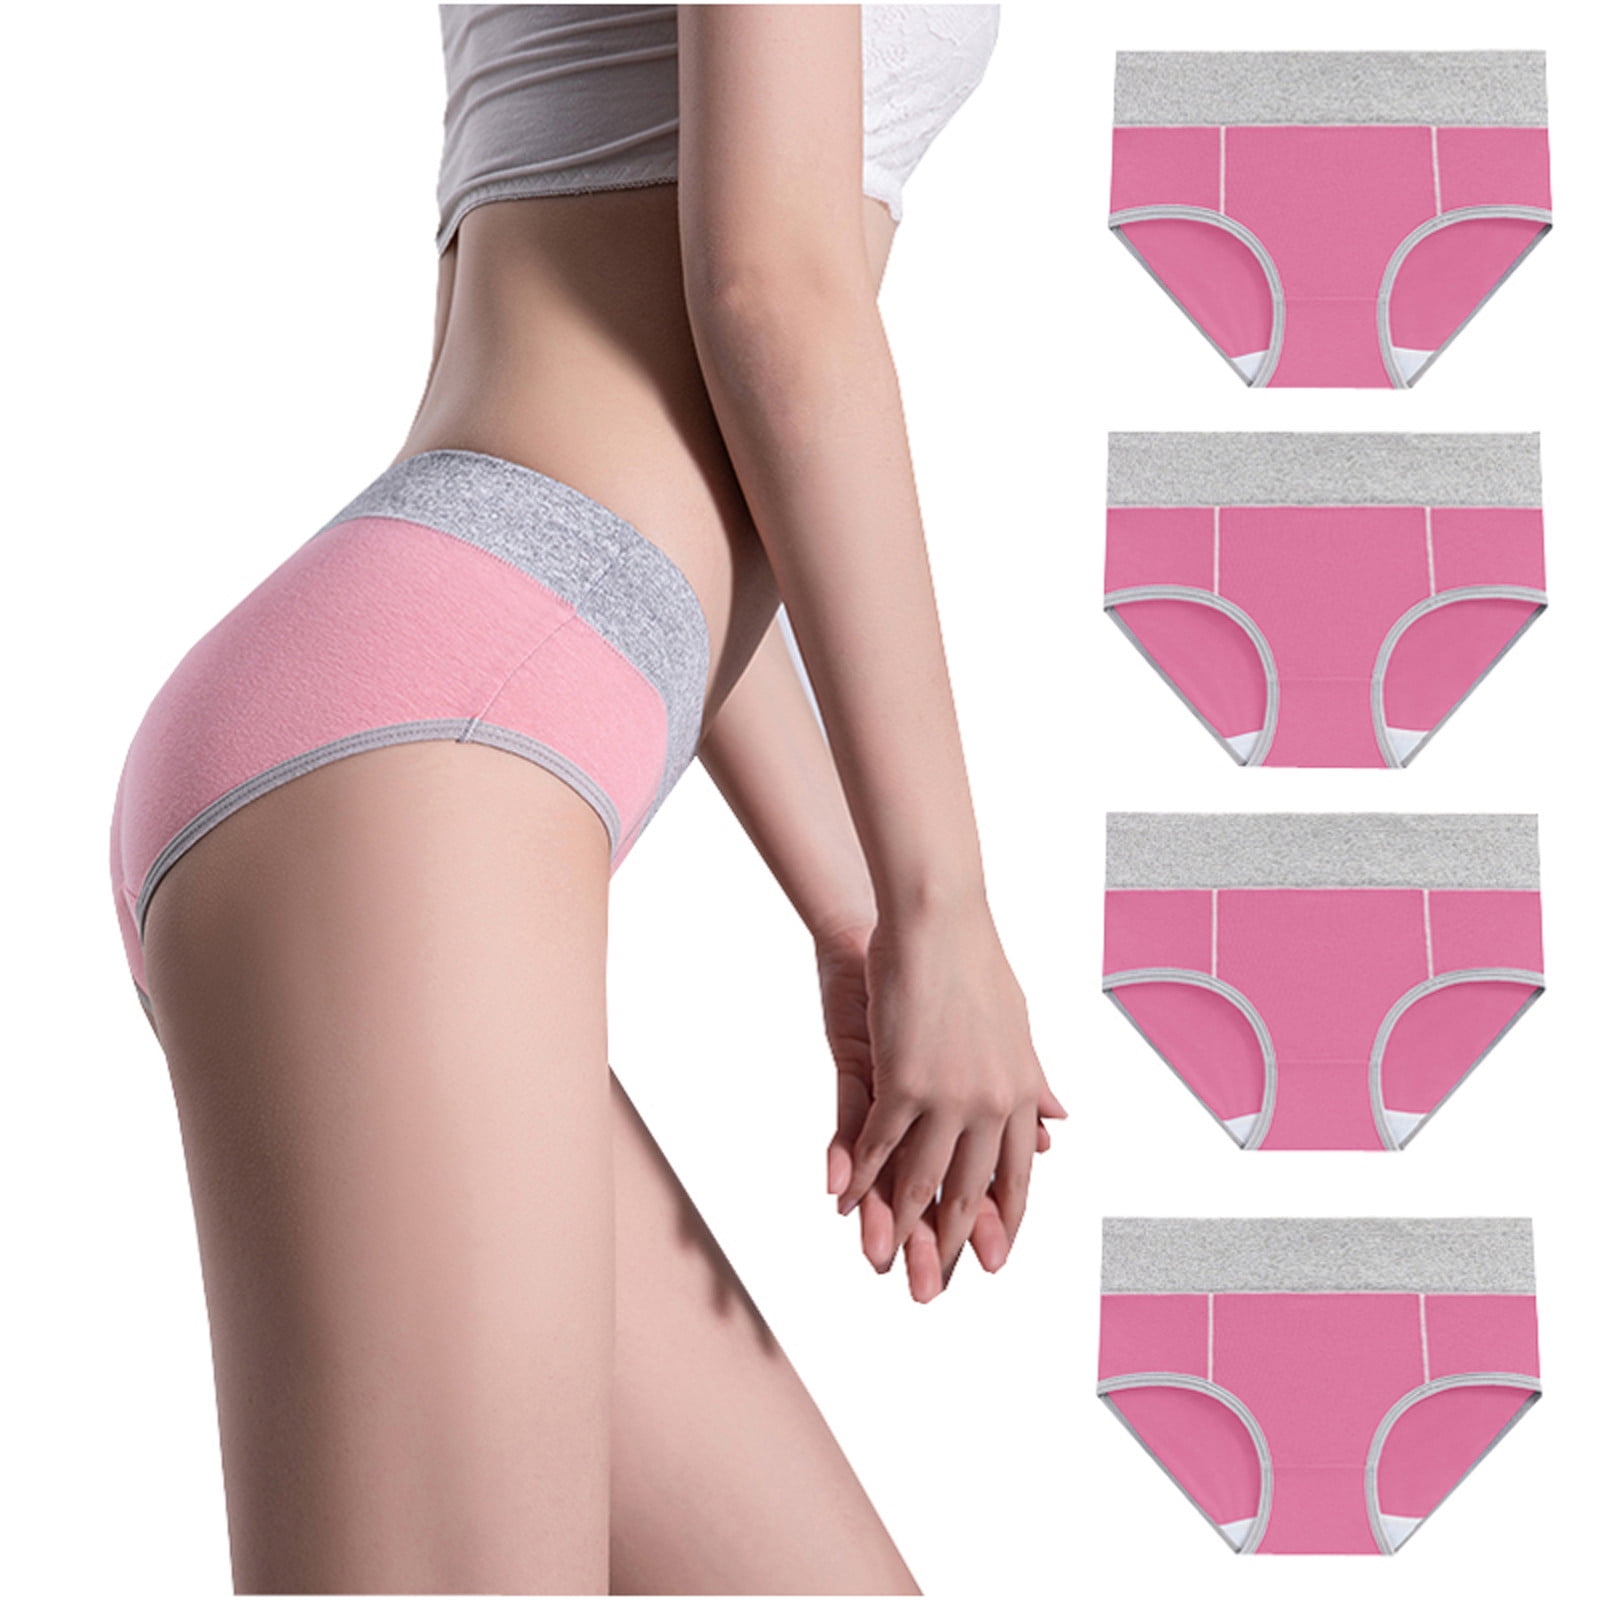 Efsteb 4 Pack Womens Underwear Cotton Solid Color Patchwork Briefs  Underwear Knickers Panties Briefs Breathable Comfortable Lingerie Hot Pink  